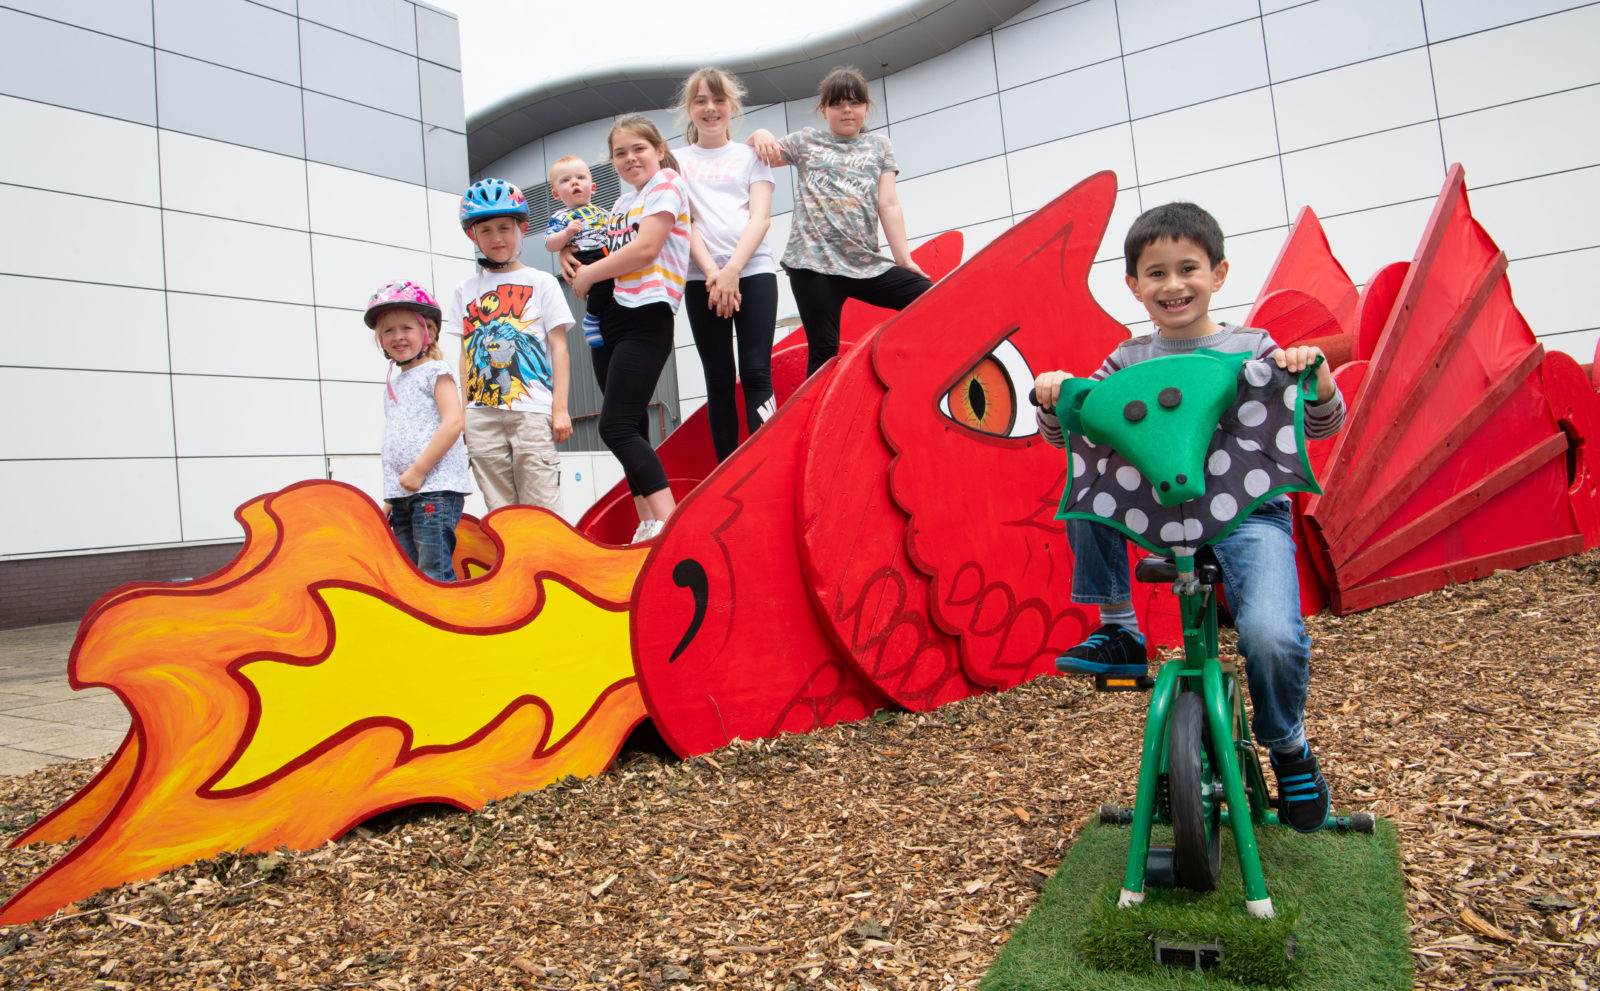 Cardiff Bay's Red Dragon Centre Celebrates 25 Years and Fifty Million  Visitors